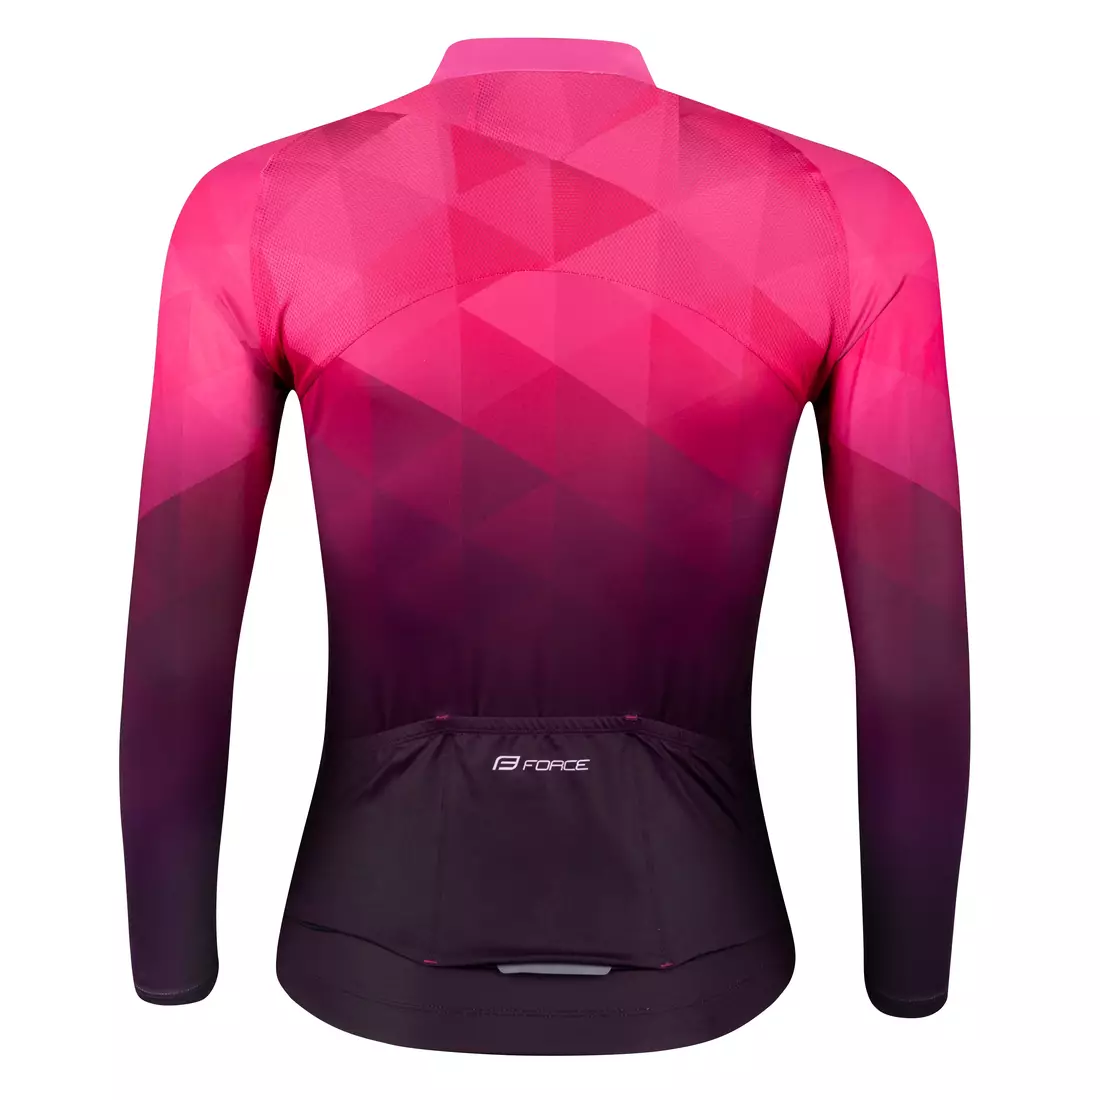 FORCE GEM Women's long-sleeved cycling jersey pink 9001437